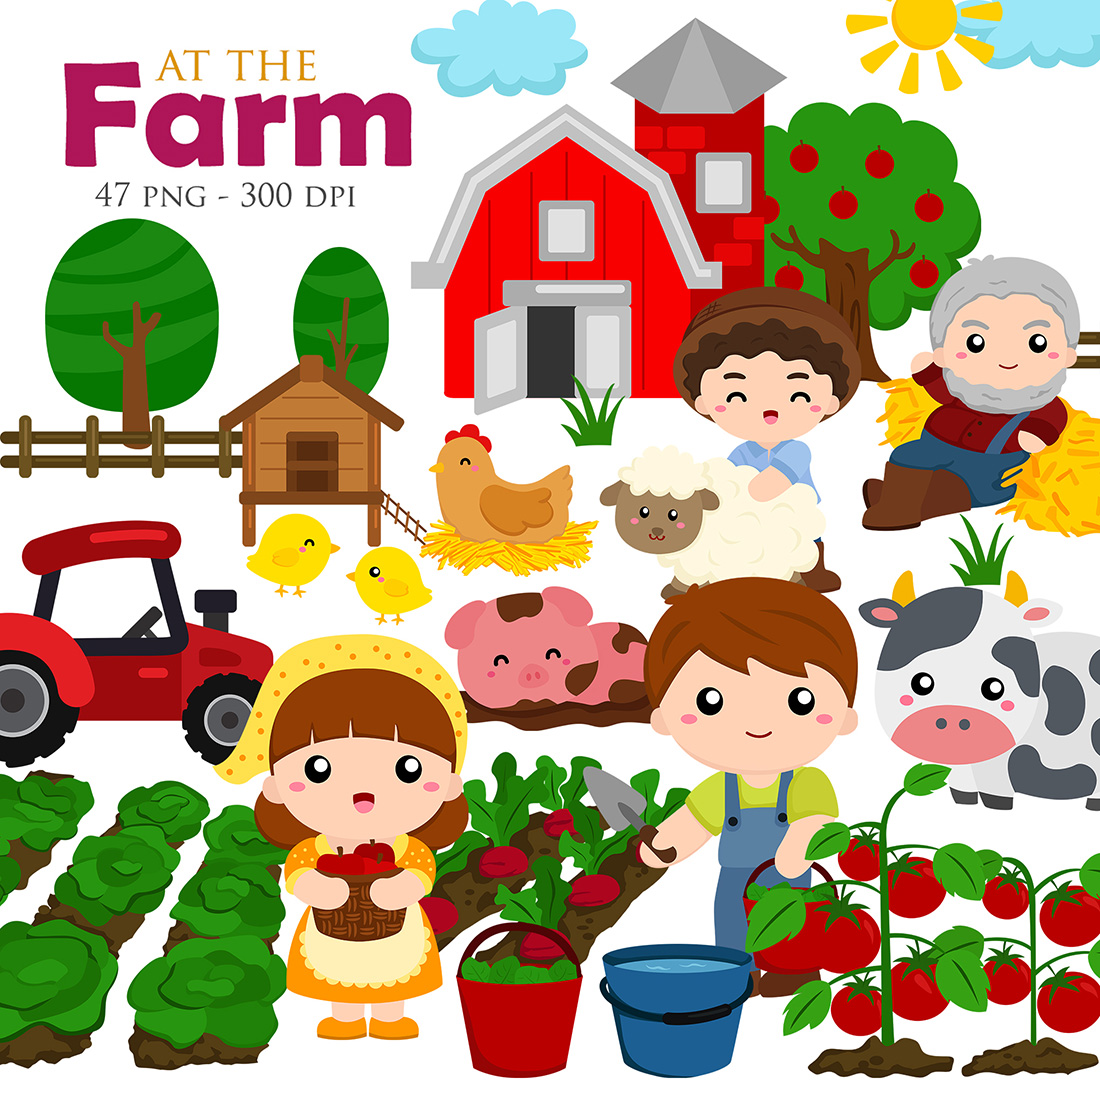 Cute and Fun At The Farm with Farmer Family and Animals Doing Harvest Vegetables with Tractor Barn Horse Sheep Cow Chicken Pig Duck Cartoon Illustration Vector Clipart Sticker Decoration Background Bundles Art cover image.